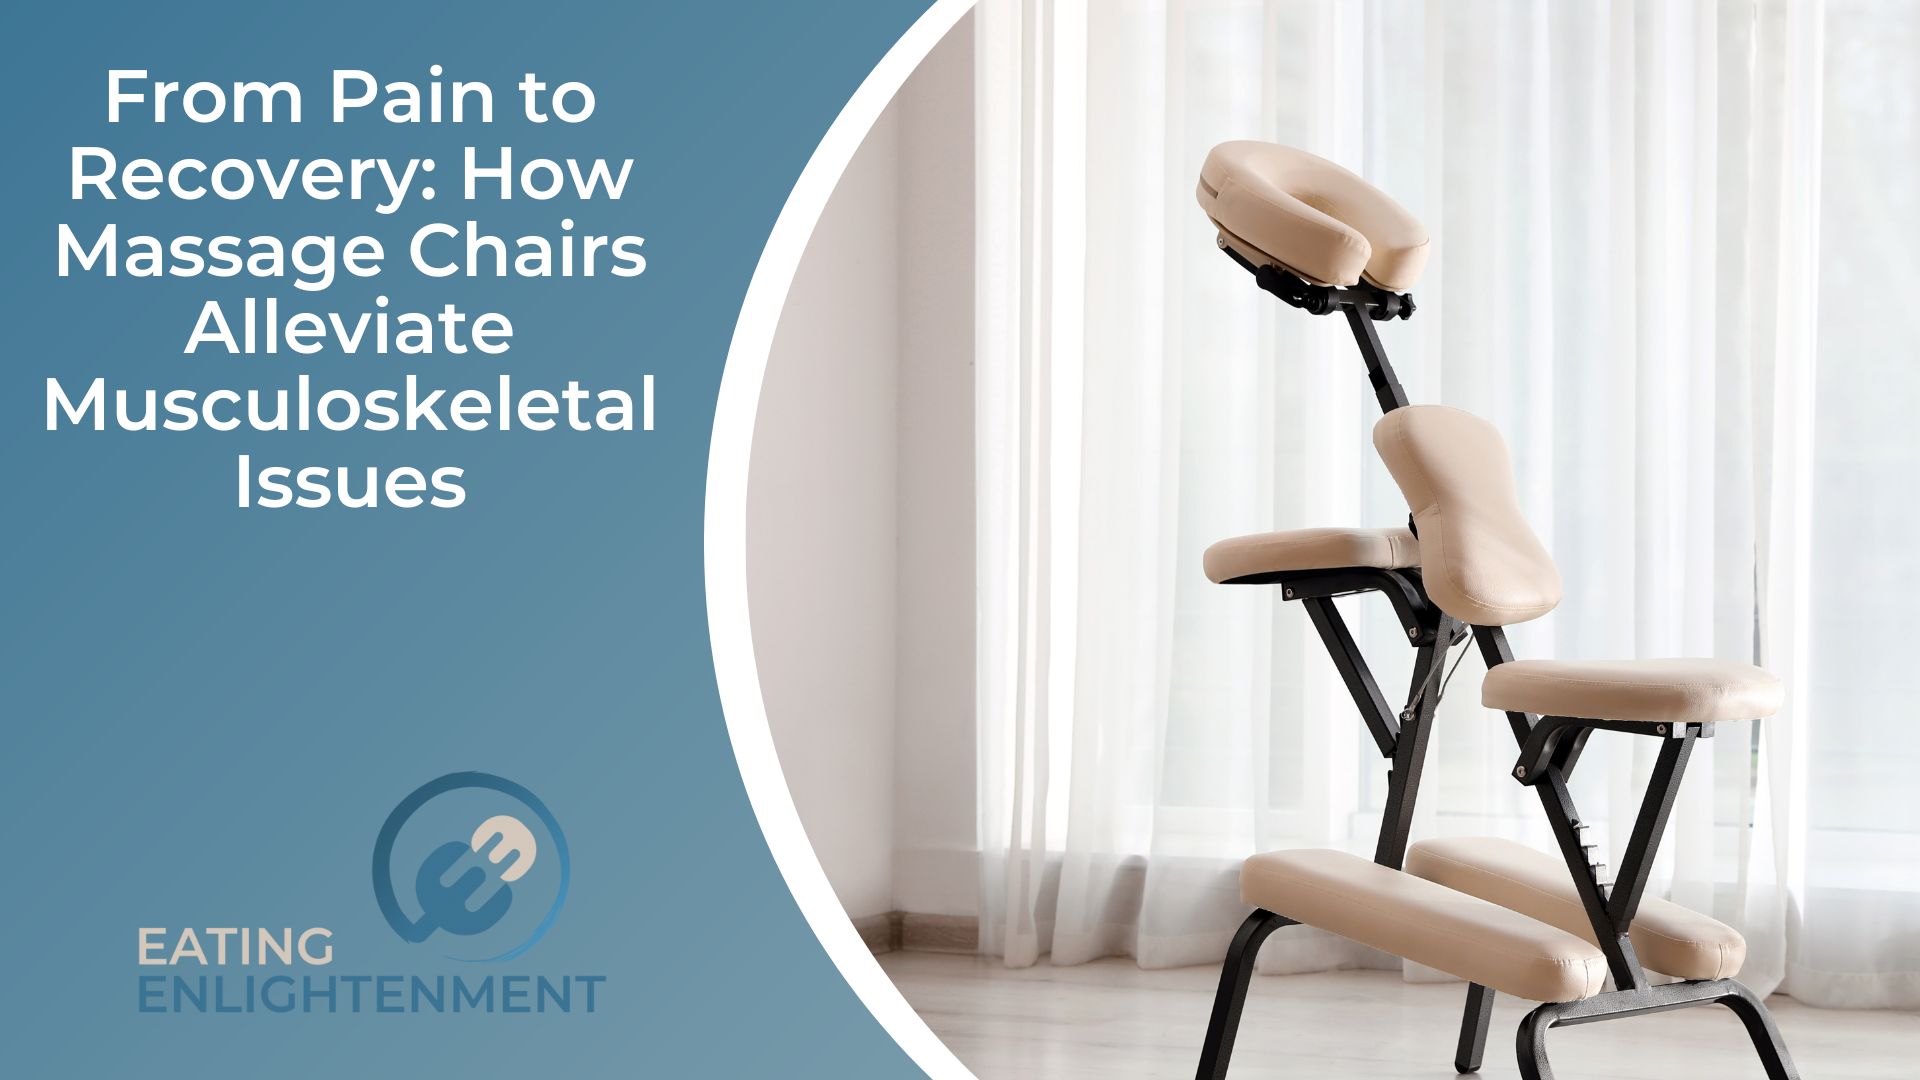 From Pain to Recovery How Commercial Massage Chairs Alleviate Musculoskeletal Issues